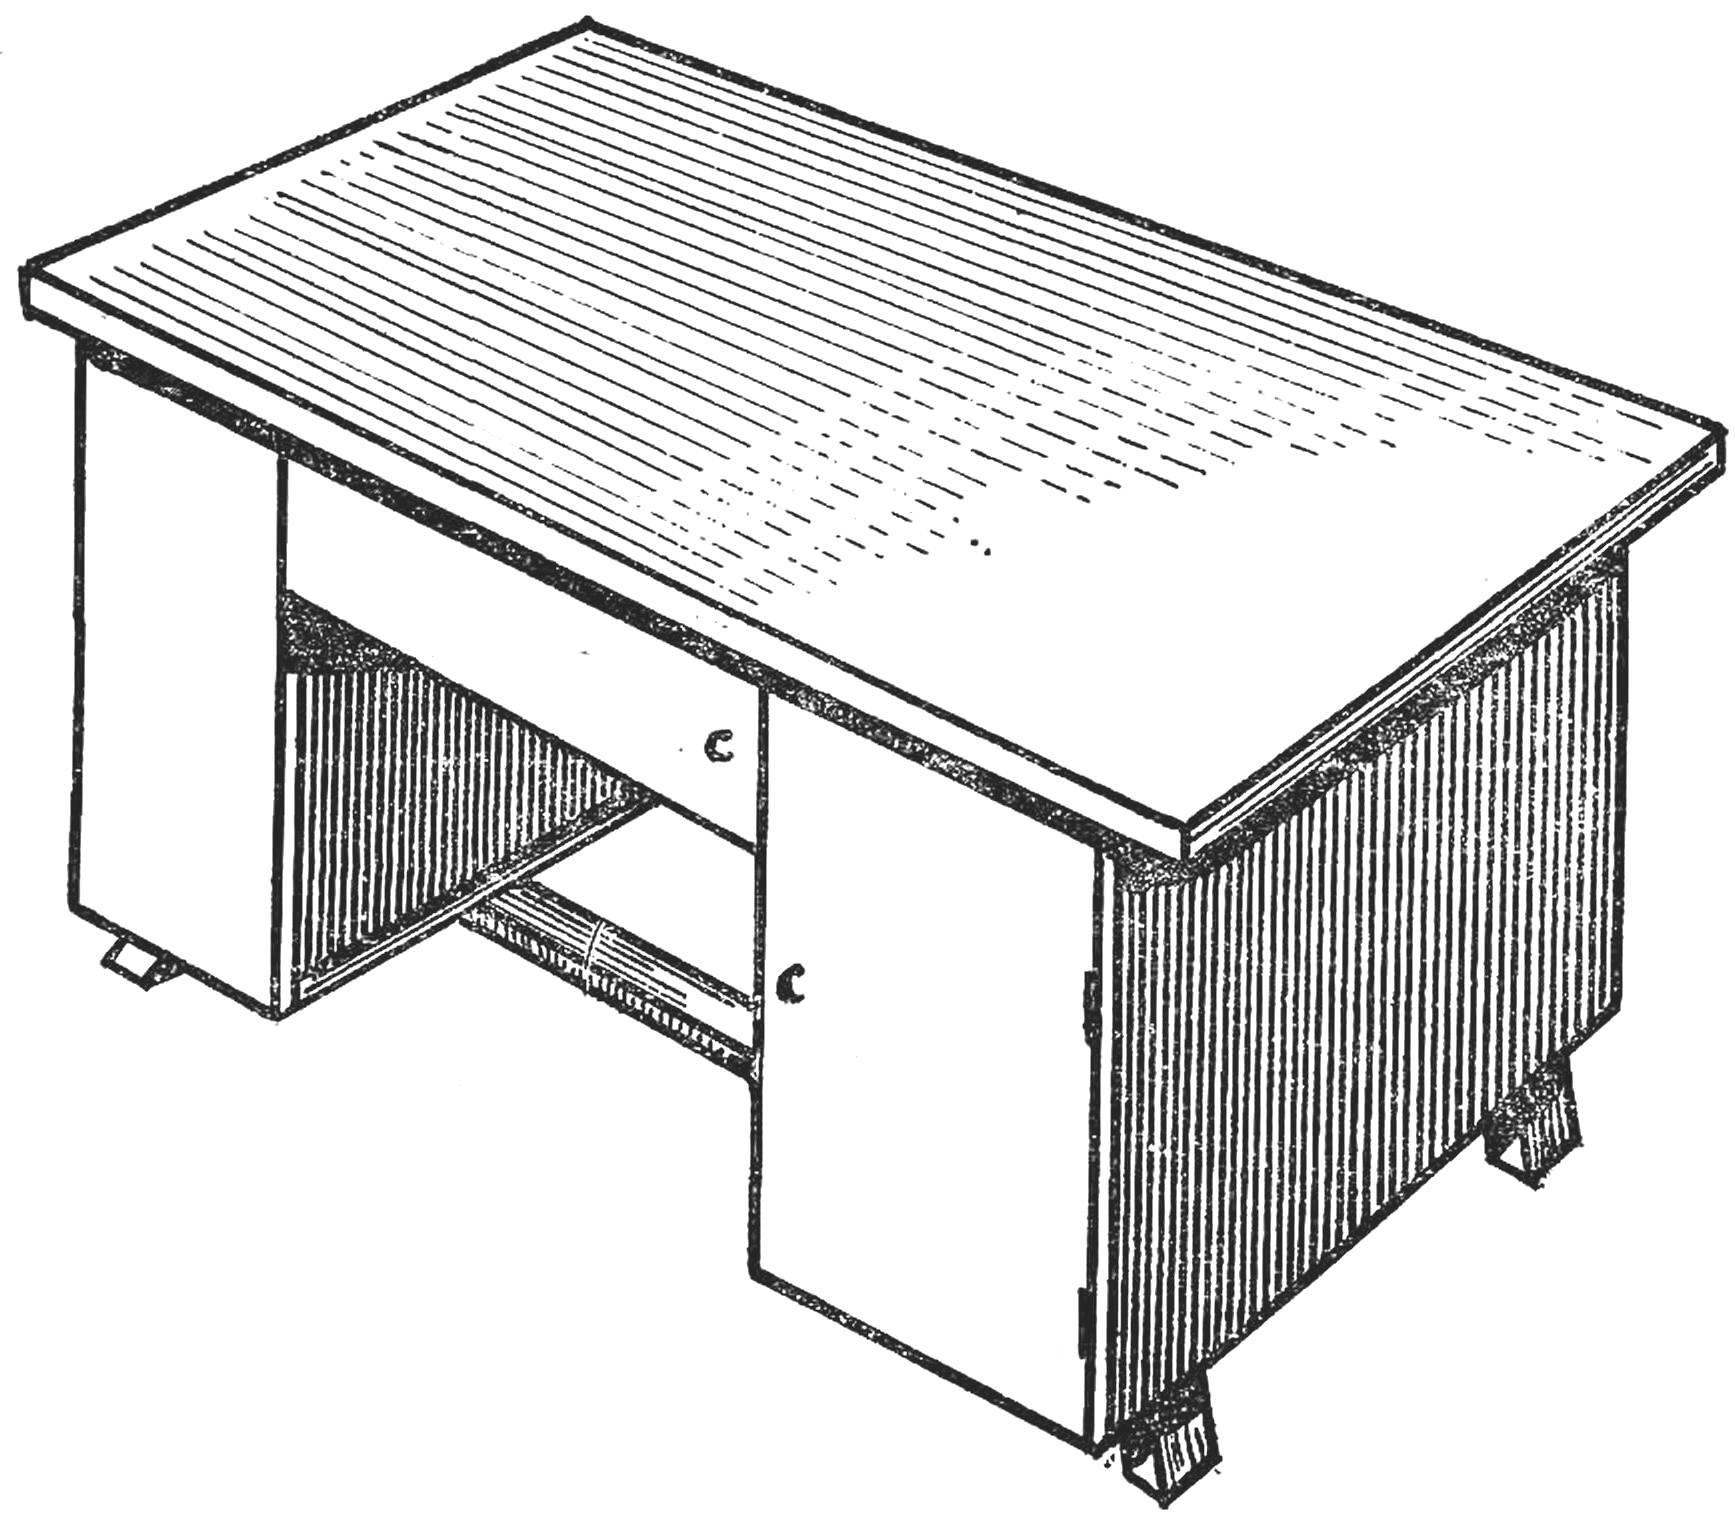 Fig. 1. The appearance of the closed table-workshop.